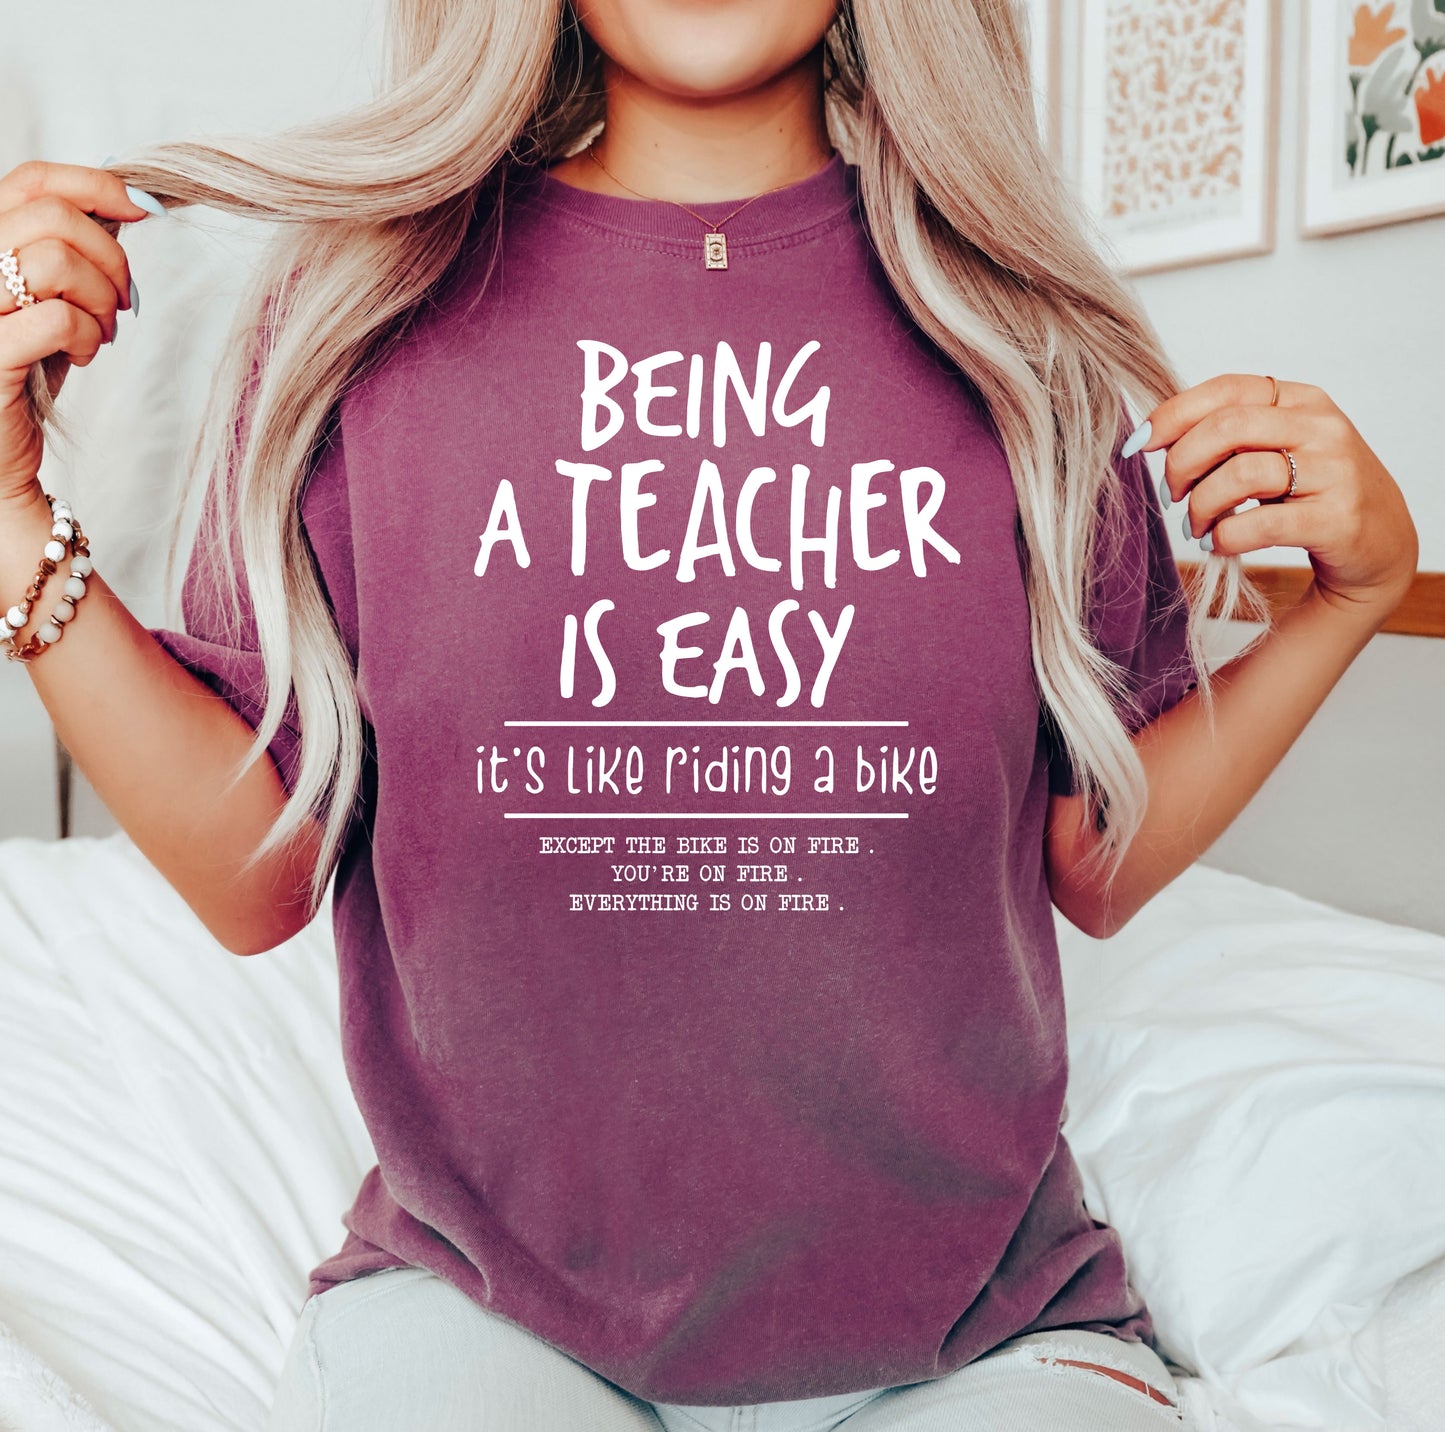 Being A Teacher Is Easy | Garment Dyed Tee